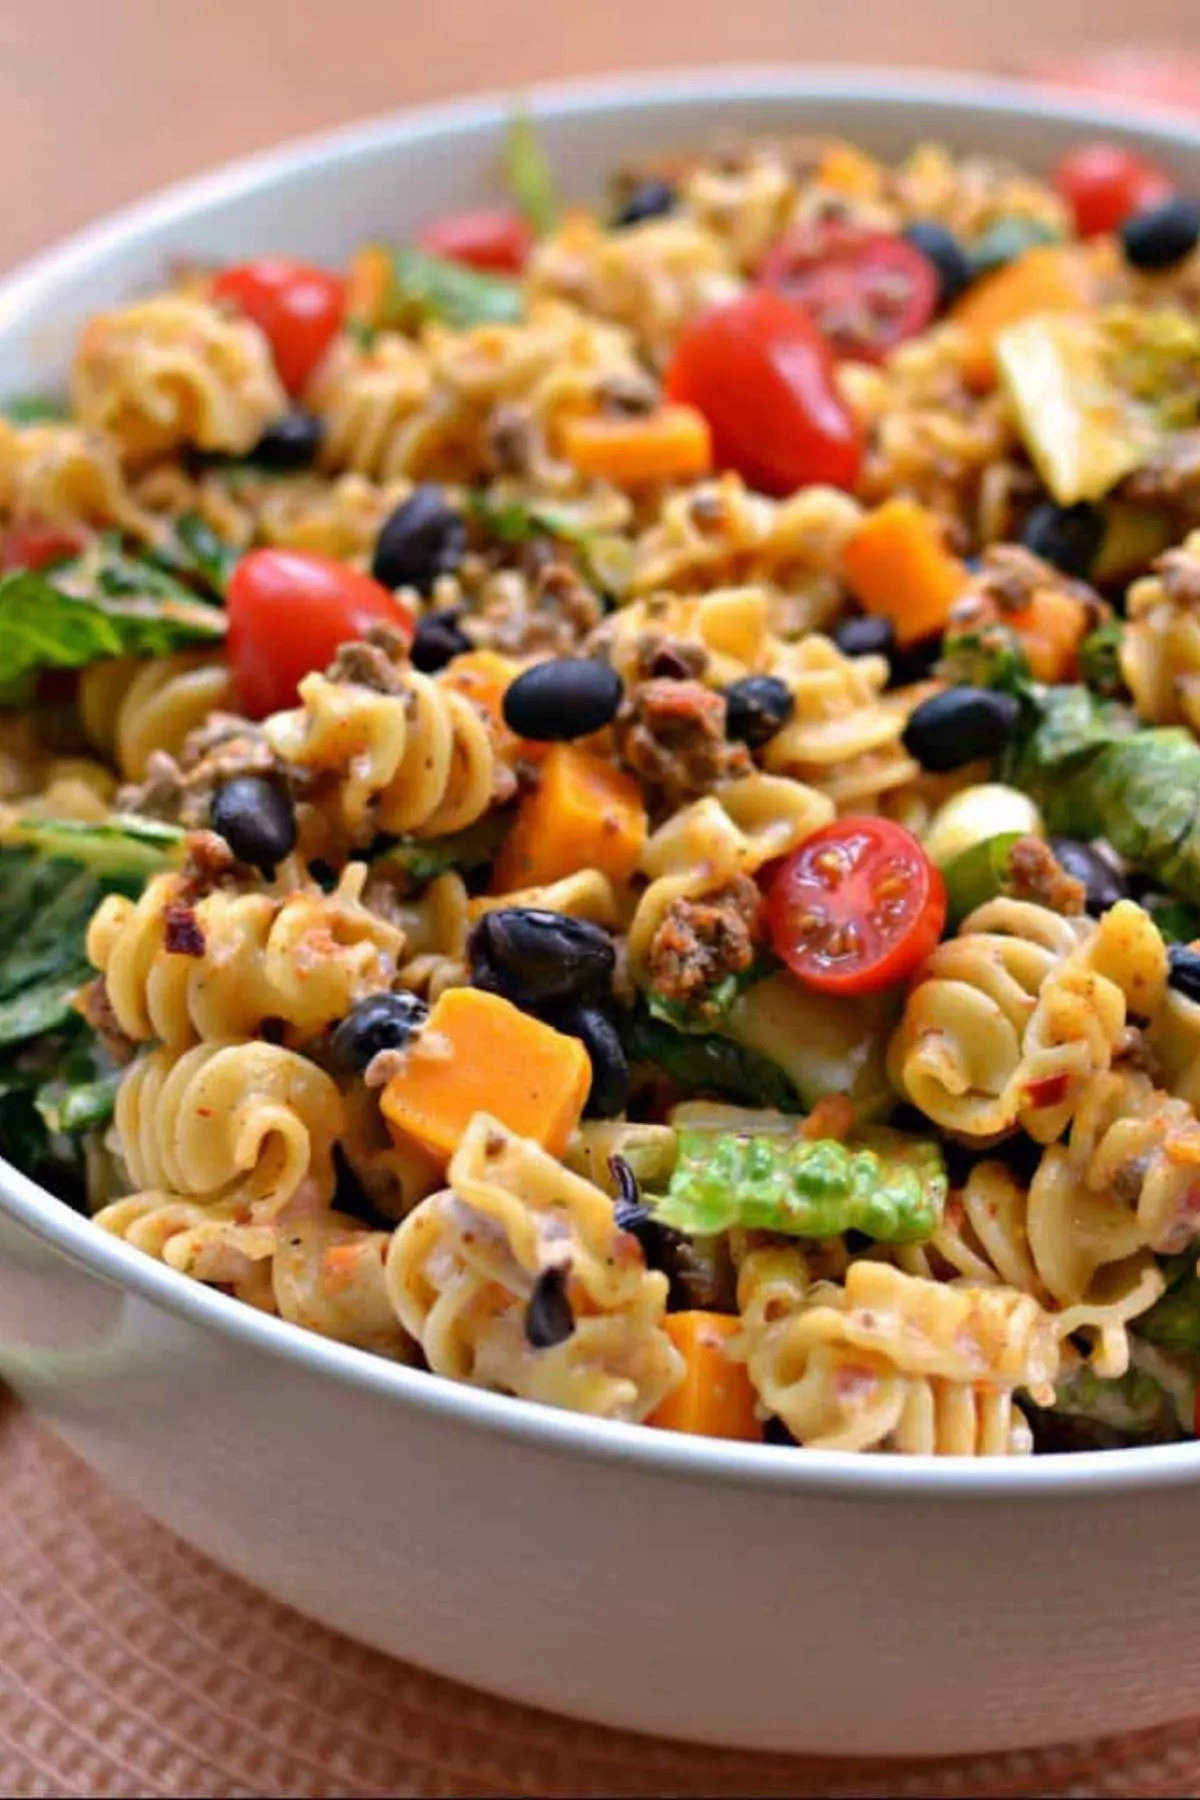 Bowl of taco pasta salad with black beans, cheese, tomatoes and lettuce.